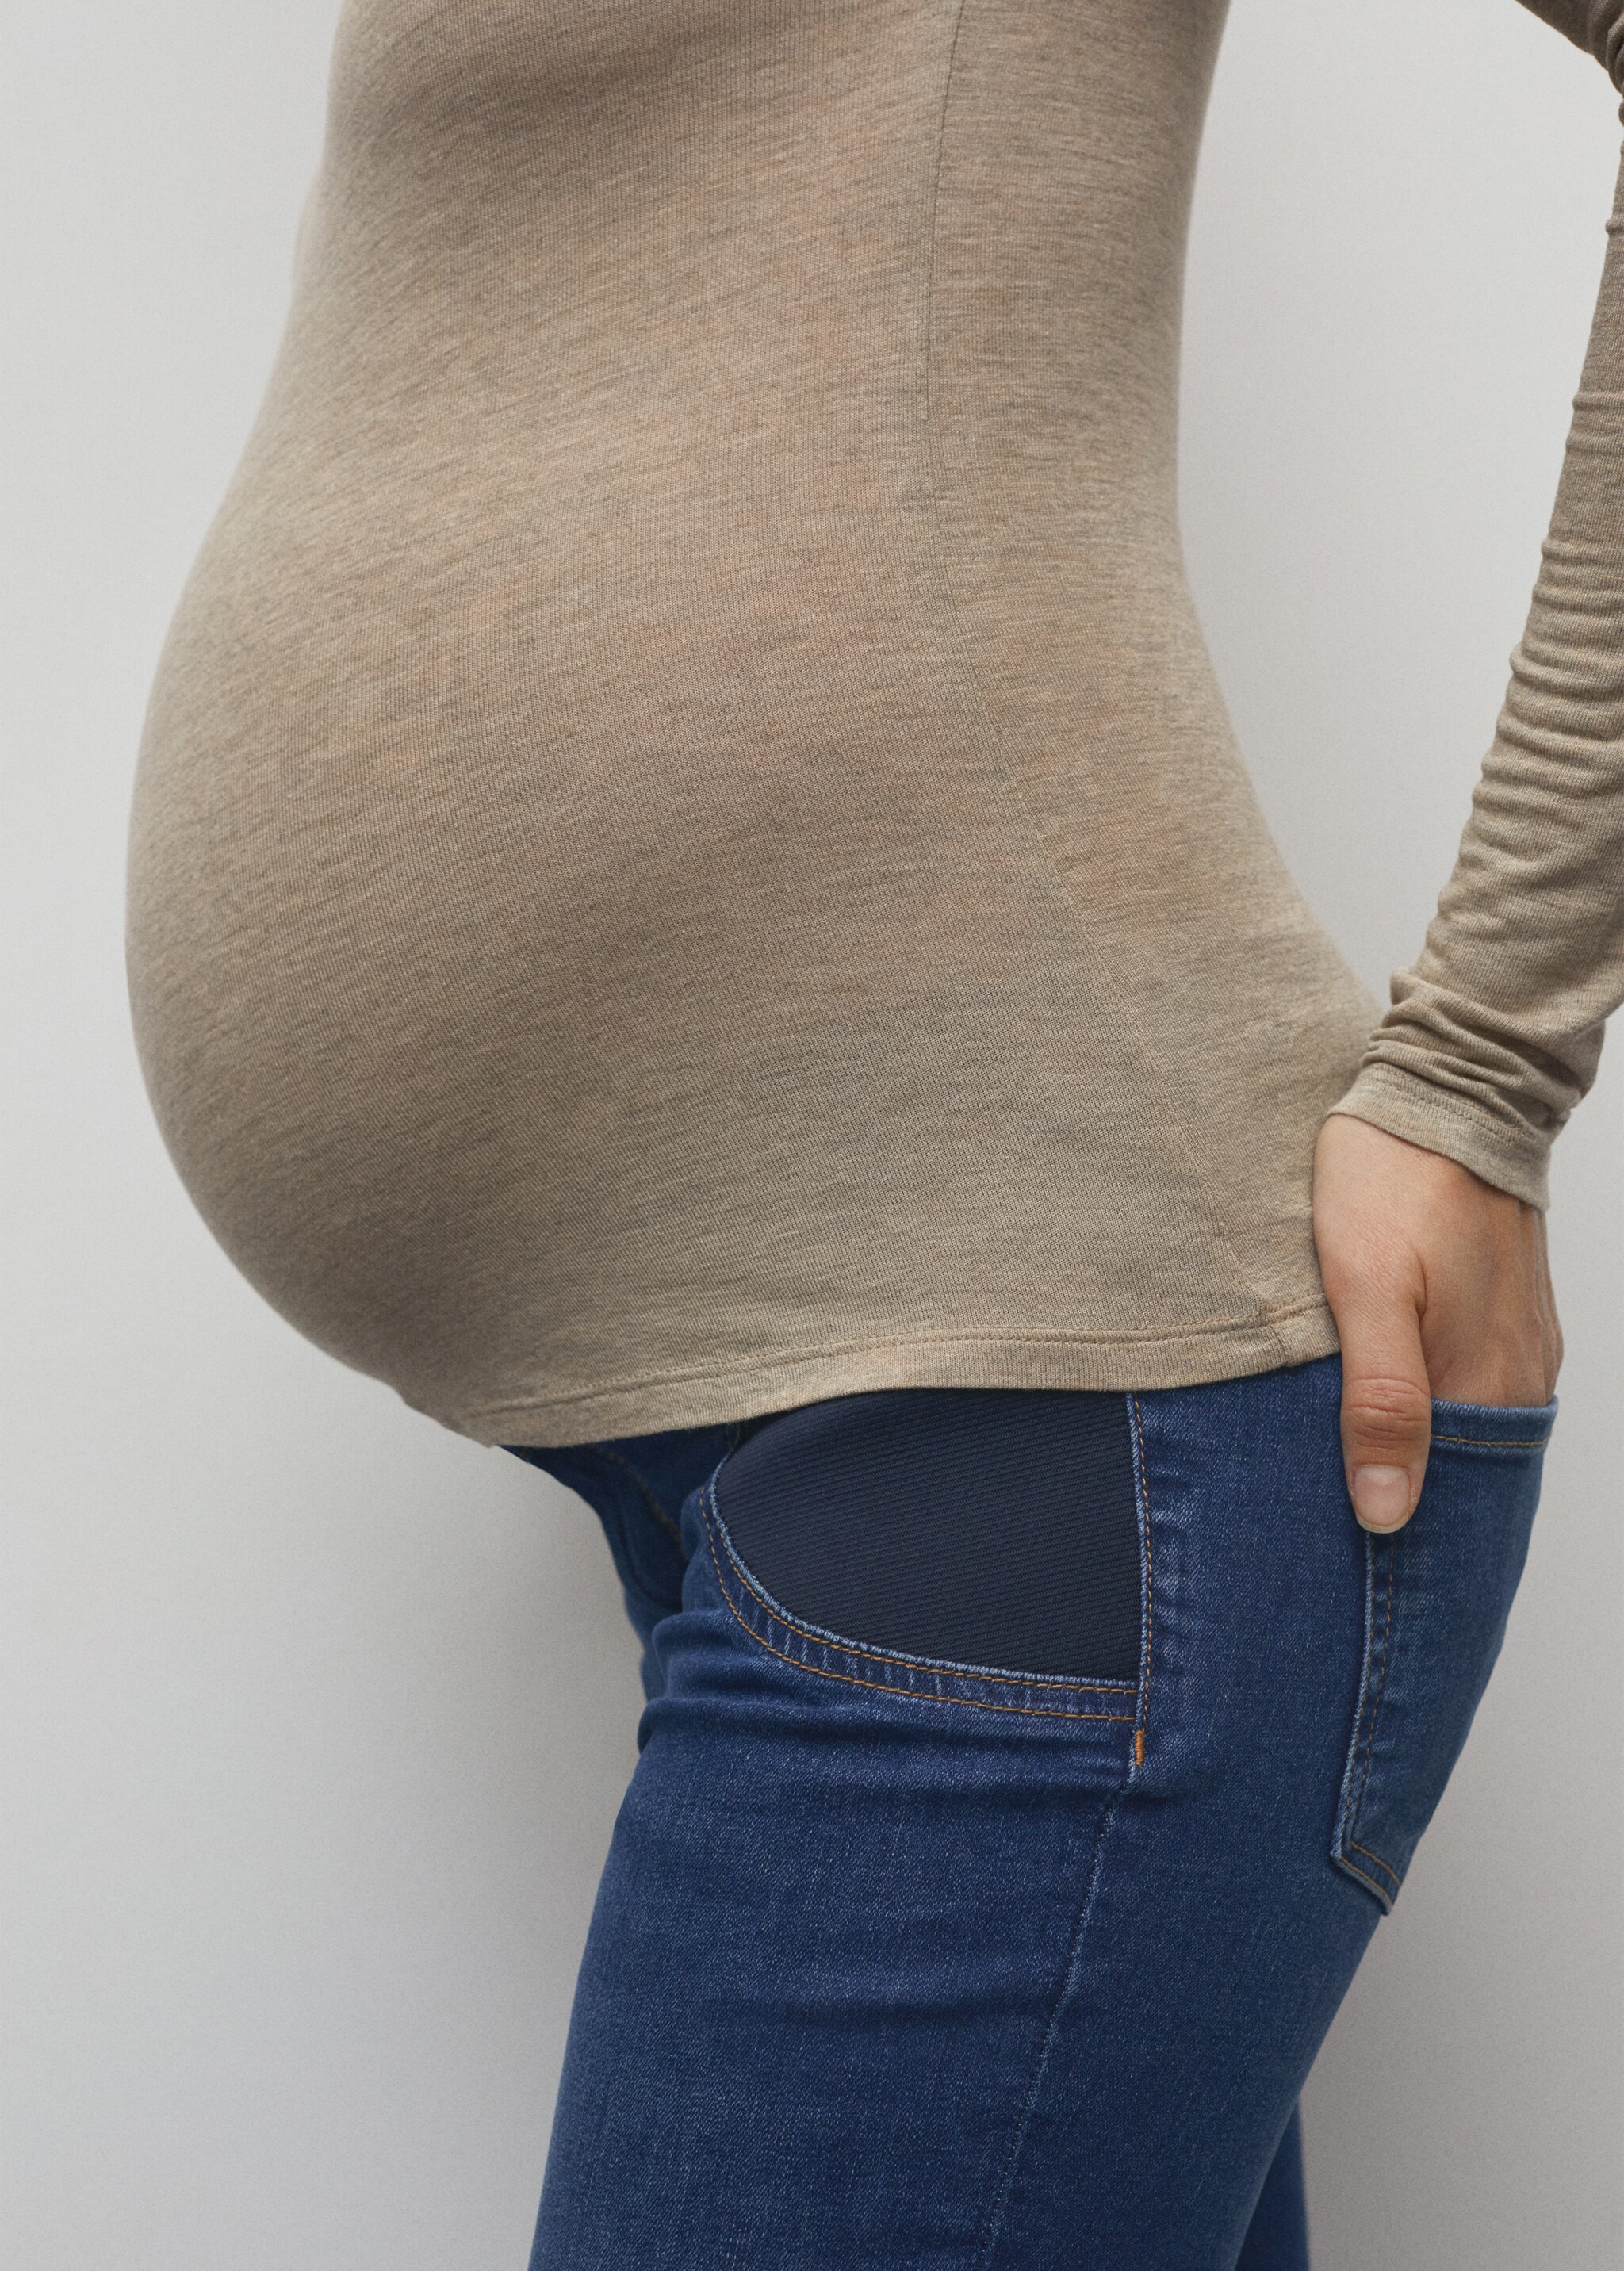 Maternity skinny jeans - Details of the article 6